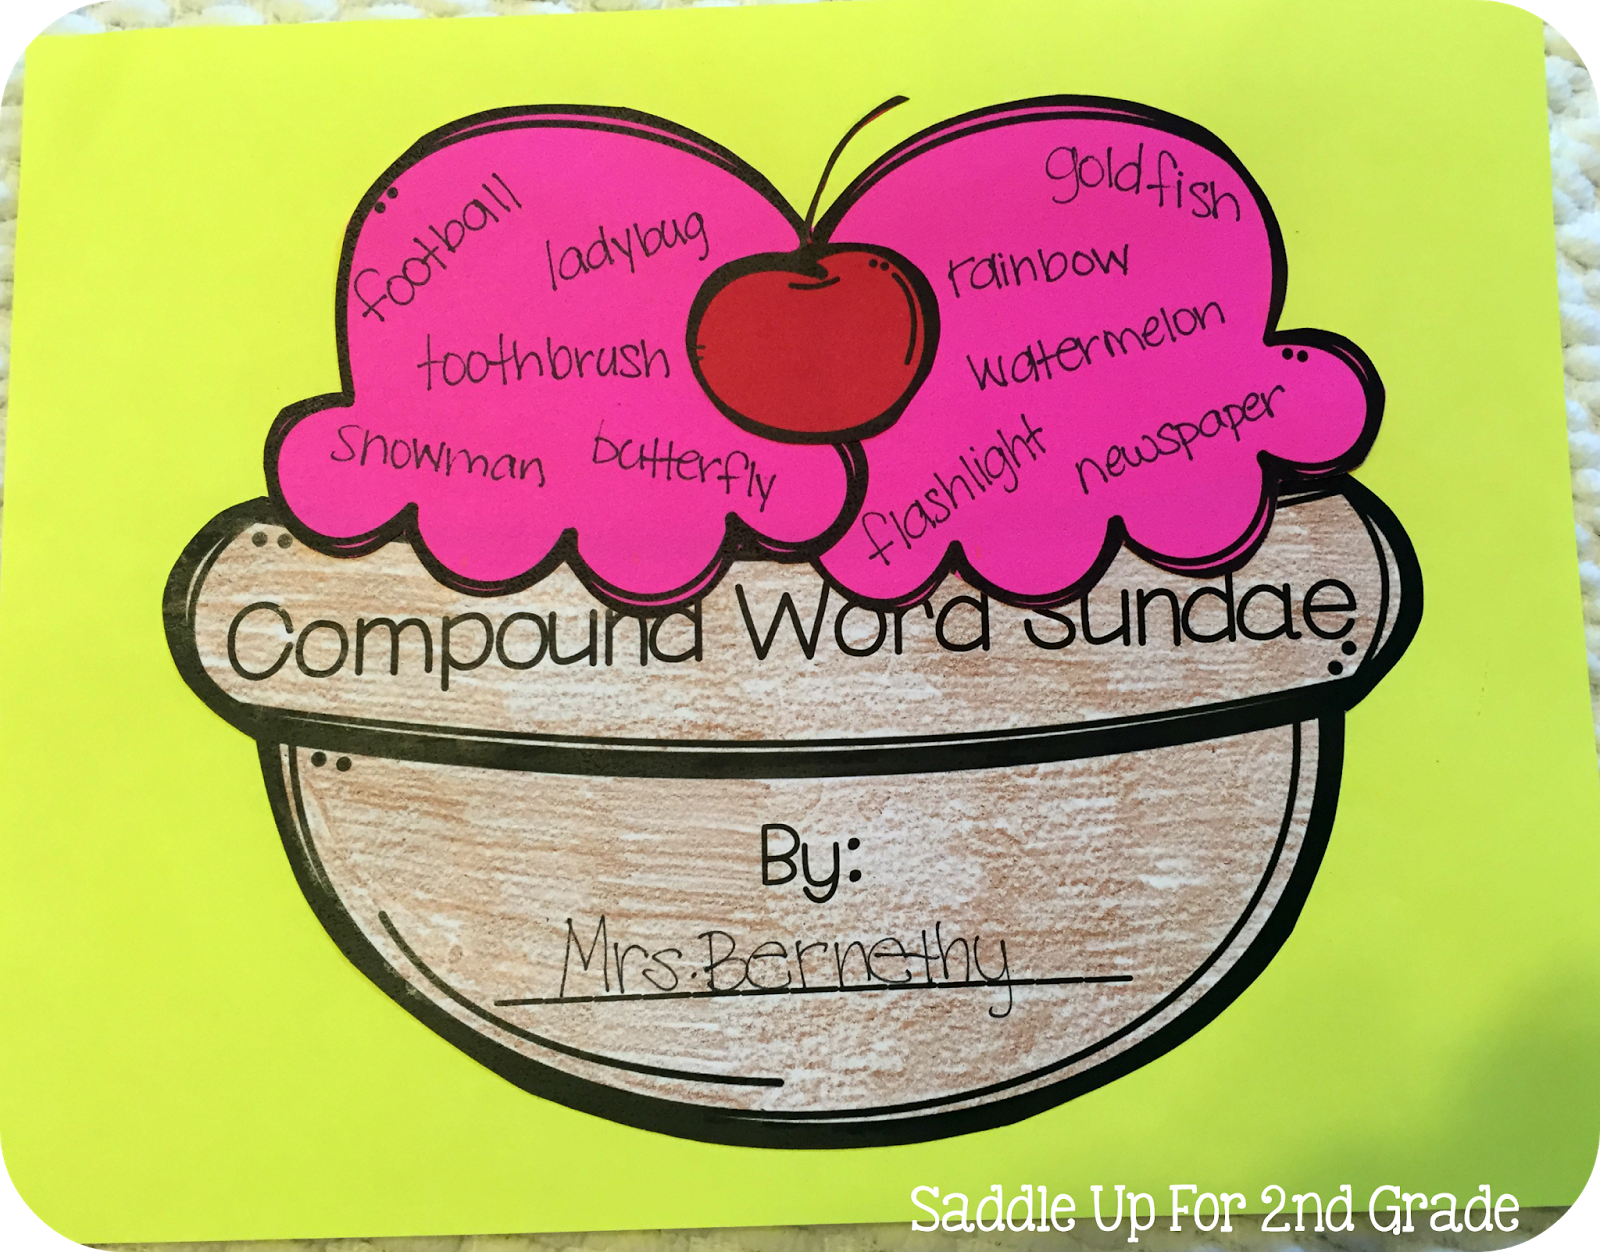 Compound Word Sundae by Saddle Up For 2nd Grade